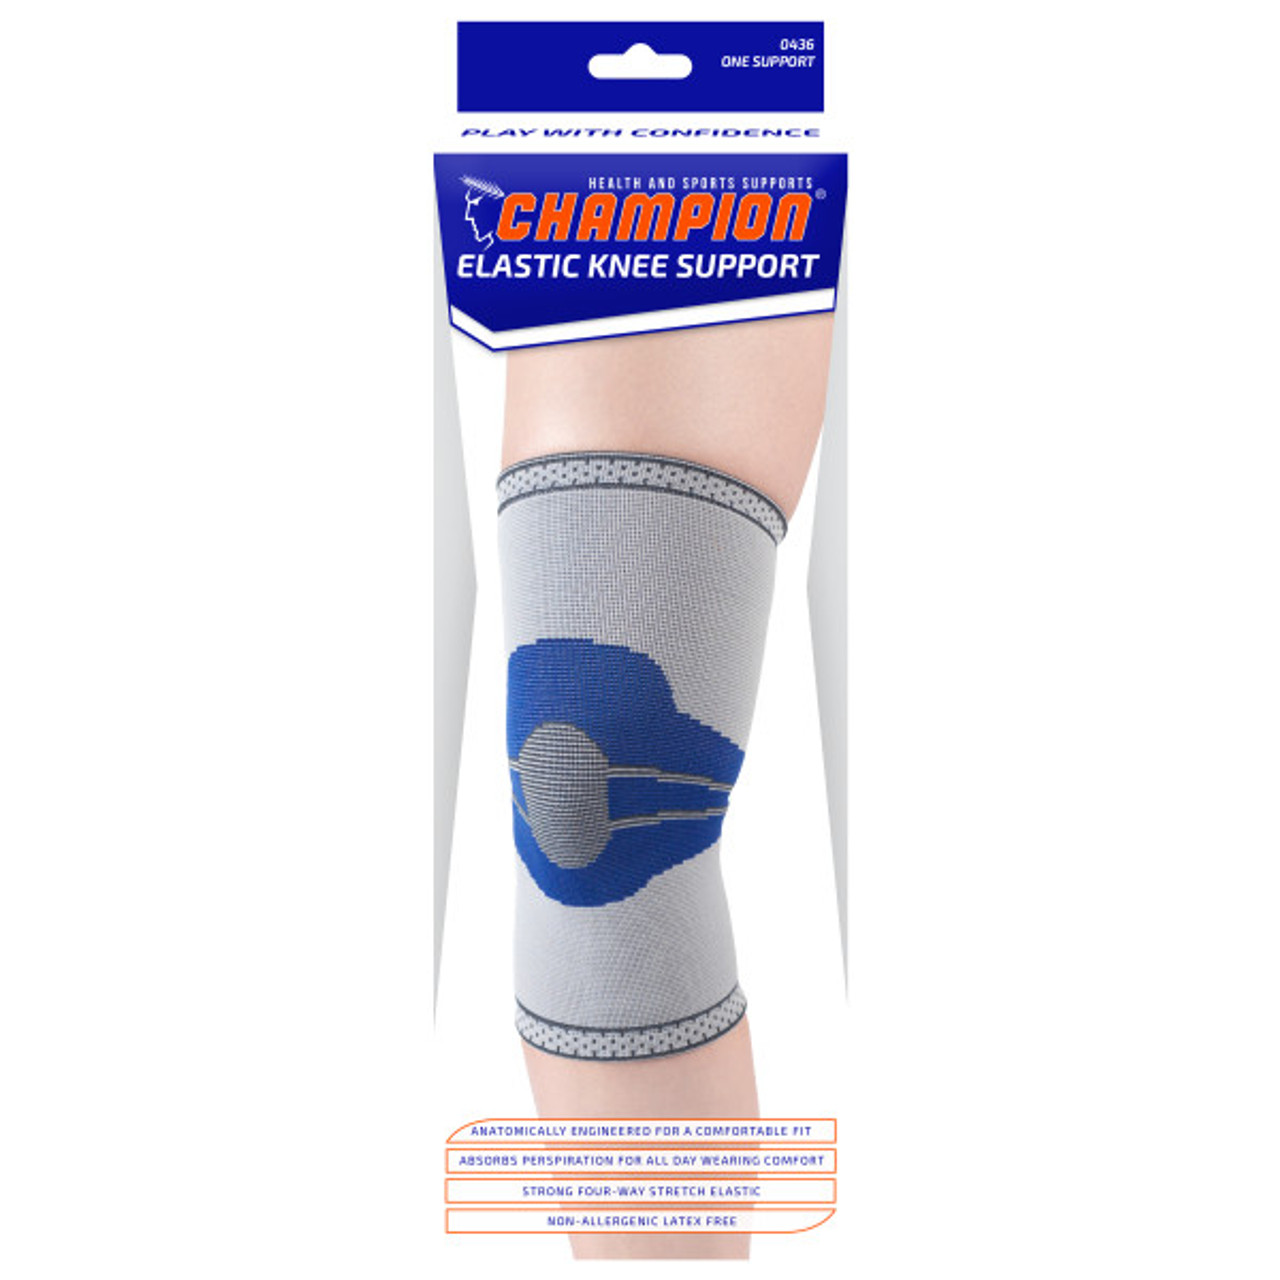 Champion 0436-XL ELASTIC KNEE SUPPORT, LIGHT GREY, X-Large, Each